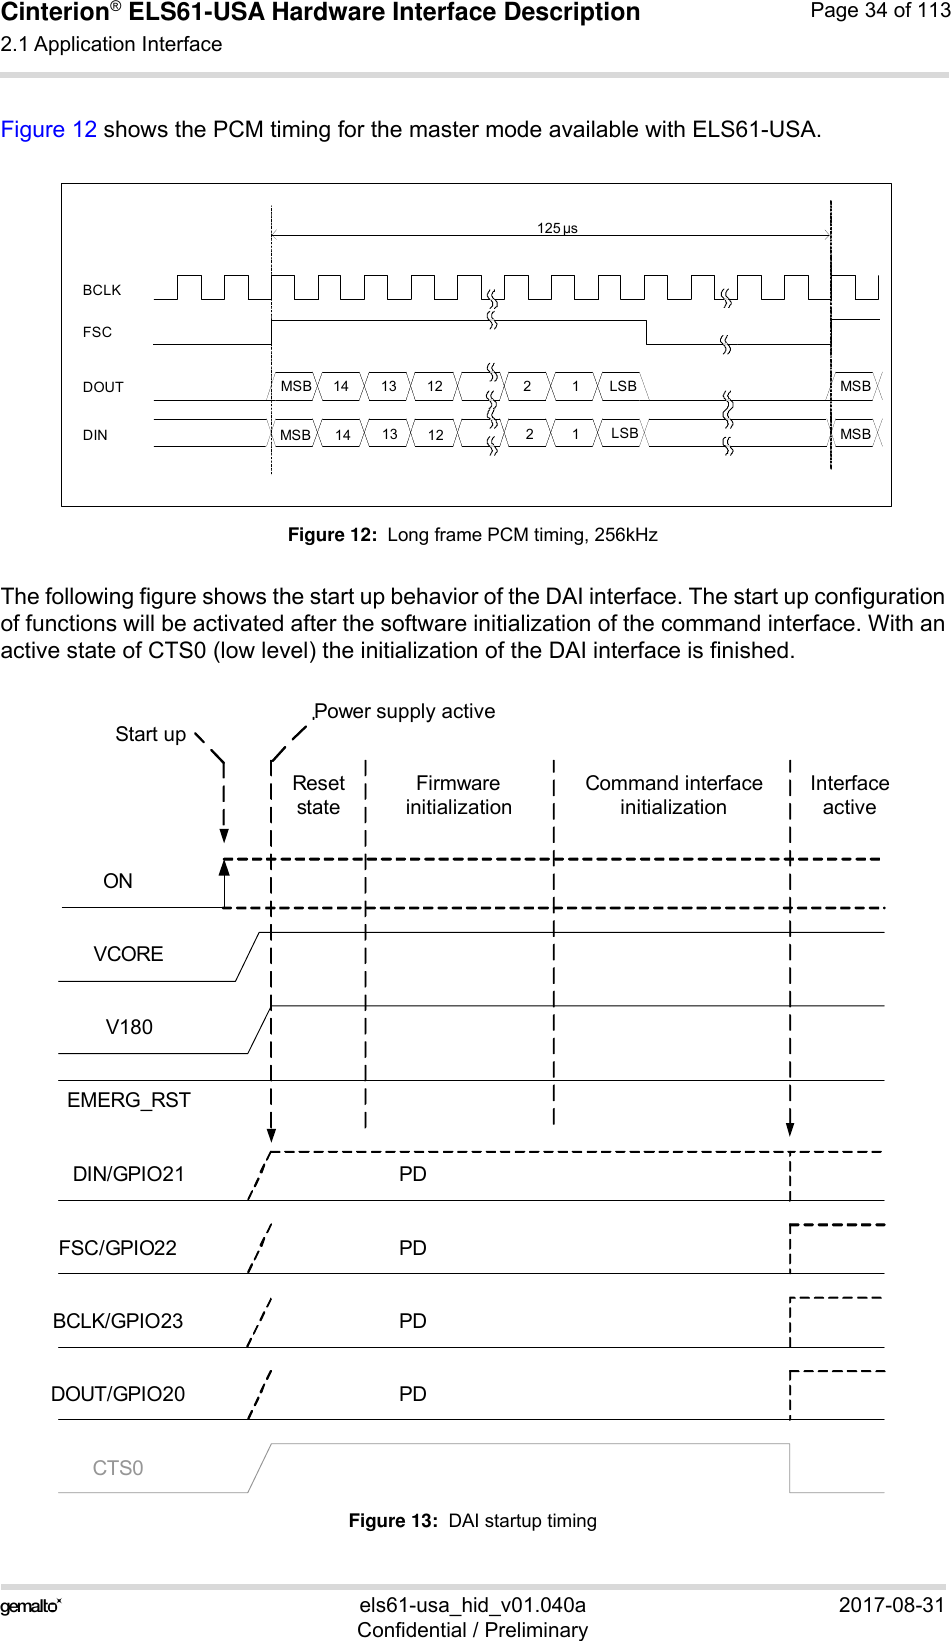 Cinterion® ELS61-USA Hardware Interface Description2.1 Application Interface59els61-usa_hid_v01.040a 2017-08-31Confidential / PreliminaryPage 34 of 113Figure 12 shows the PCM timing for the master mode available with ELS61-USA.Figure 12:  Long frame PCM timing, 256kHzThe following figure shows the start up behavior of the DAI interface. The start up configurationof functions will be activated after the software initialization of the command interface. With anactive state of CTS0 (low level) the initialization of the DAI interface is finished.Figure 13:  DAI startup timingBCLKDOUTDINFSCMSBMSBLSBLSB14 1314 1311121222MSBMSB125 µsDIN/GPIO21FSC/GPIO22BCLK/GPIO23DOUT/GPIO20PDPDPDPDCTS0ONEMERG_RSTPower supply activeStart upFirmware initializationCommand interface initializationInterface activeResetstateV180VCORE